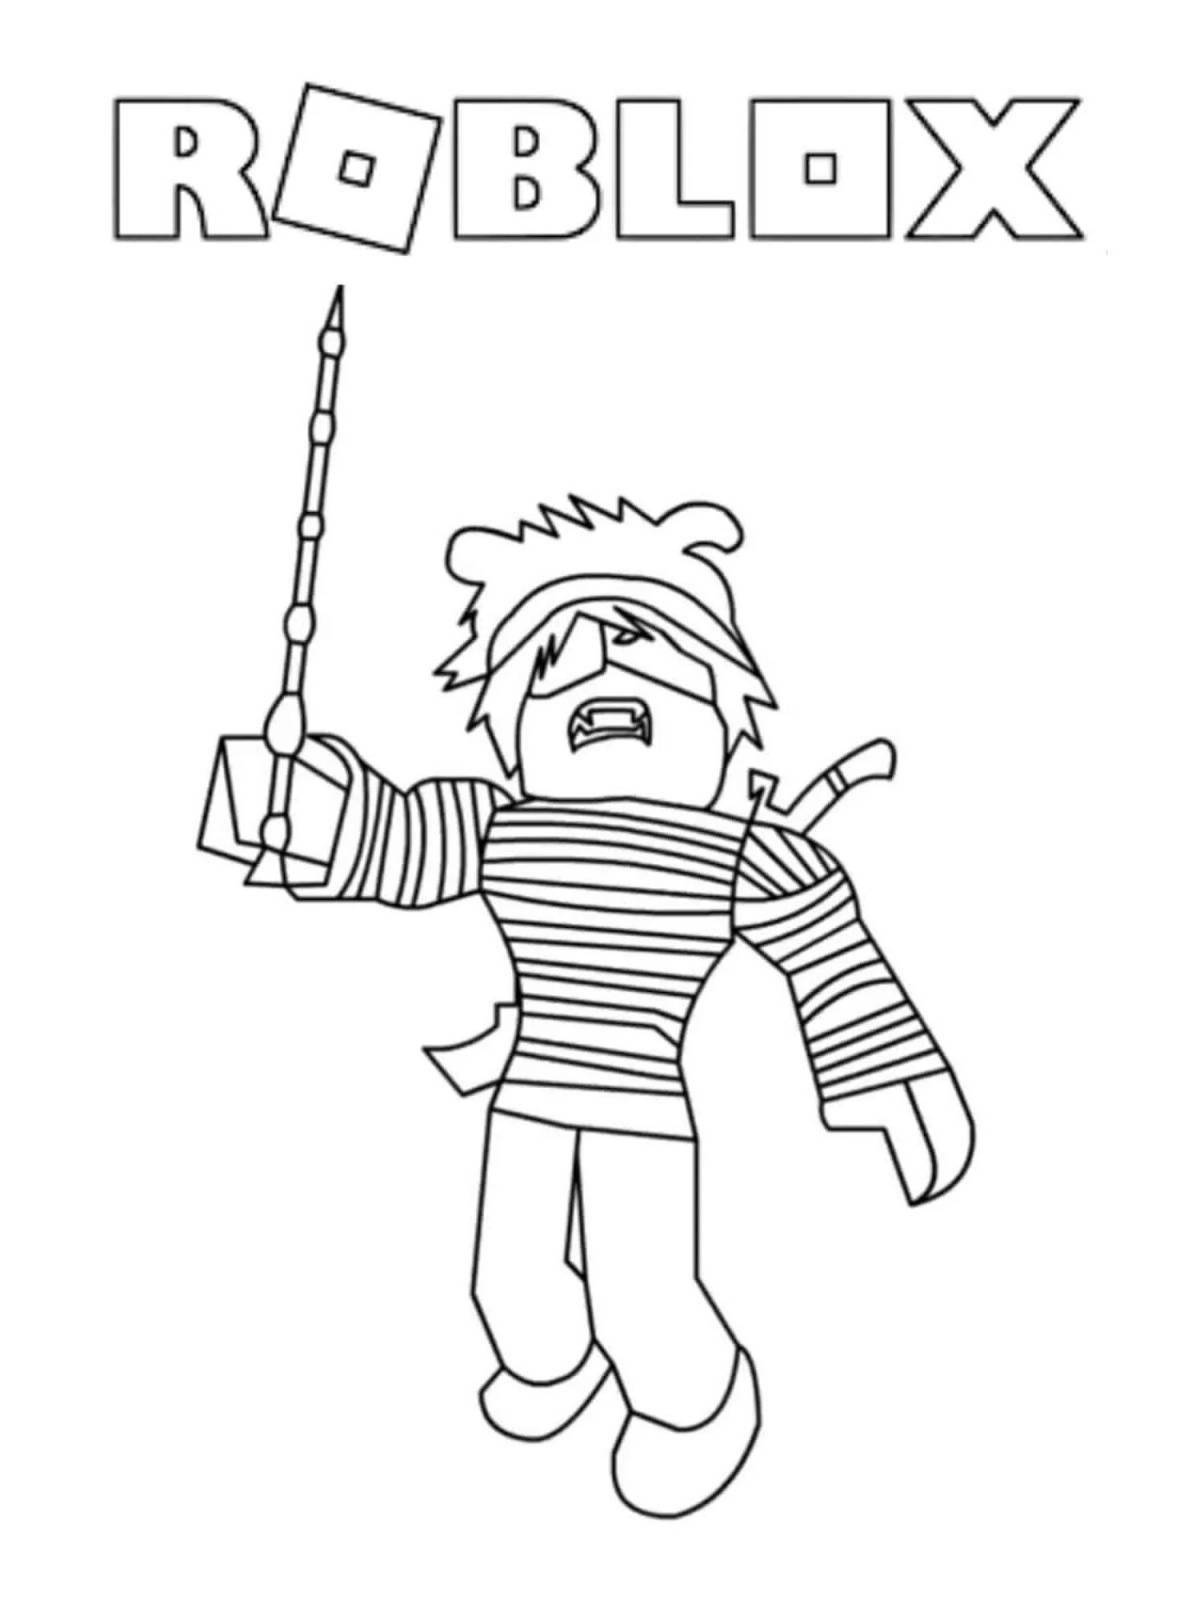 Roblox live character coloring page